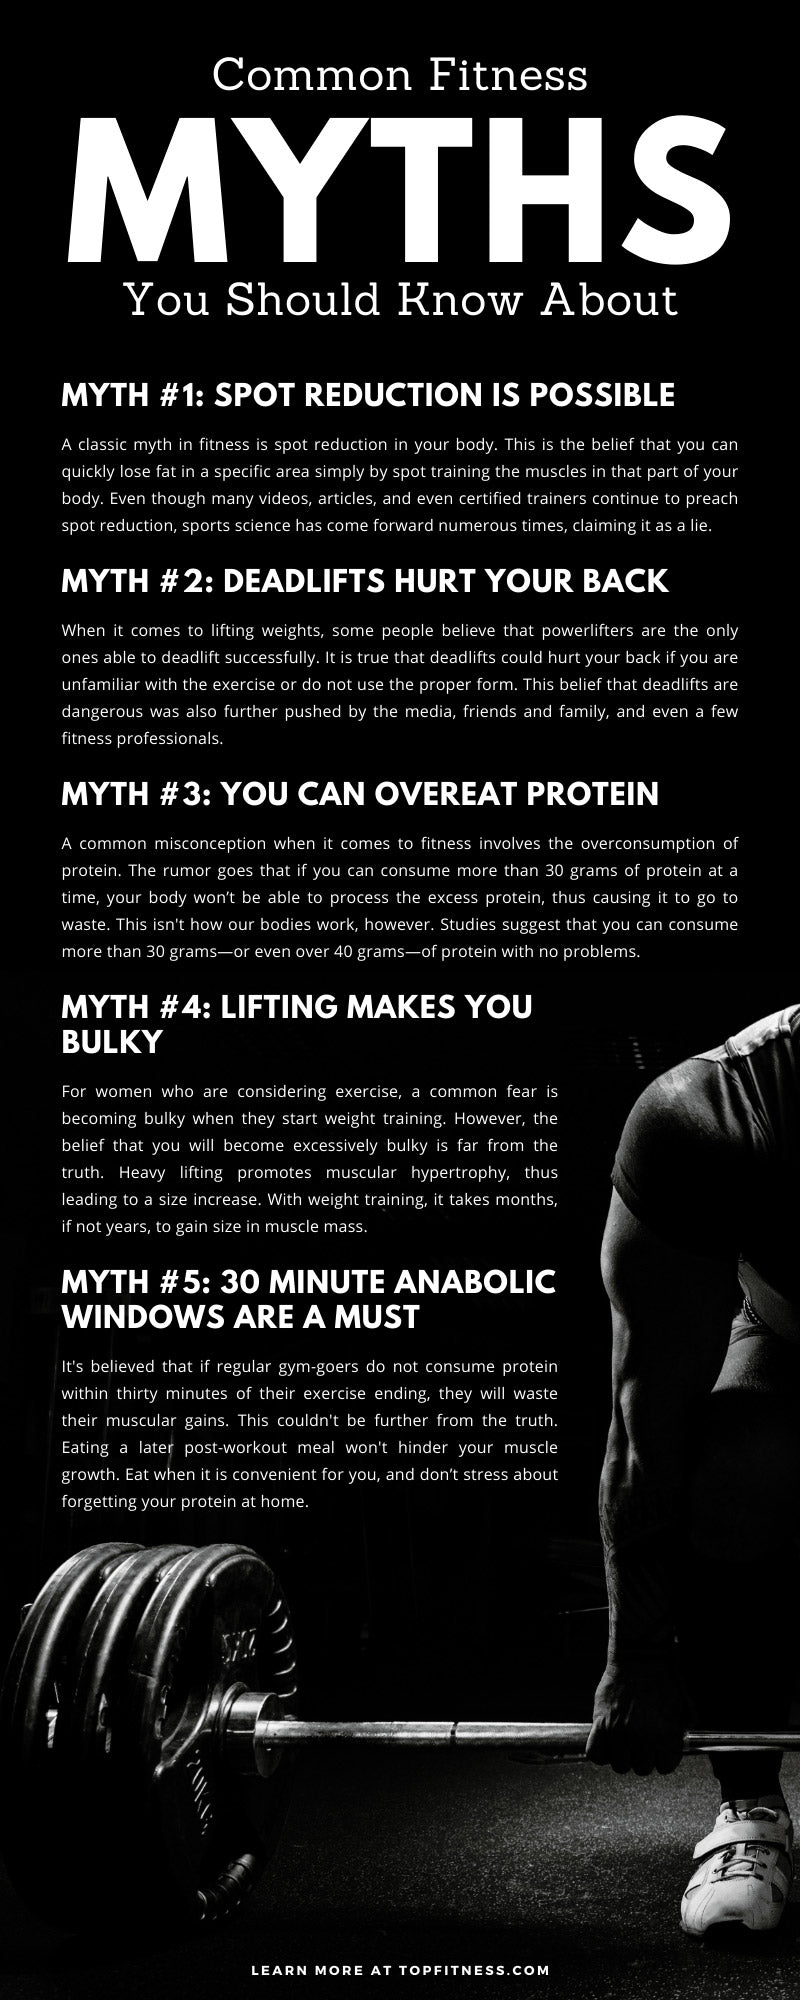 7 Health and Fitness Myths You Should Know - Physical Therapy, Personal  Training, Nutrition Consulting, Hand Therapy